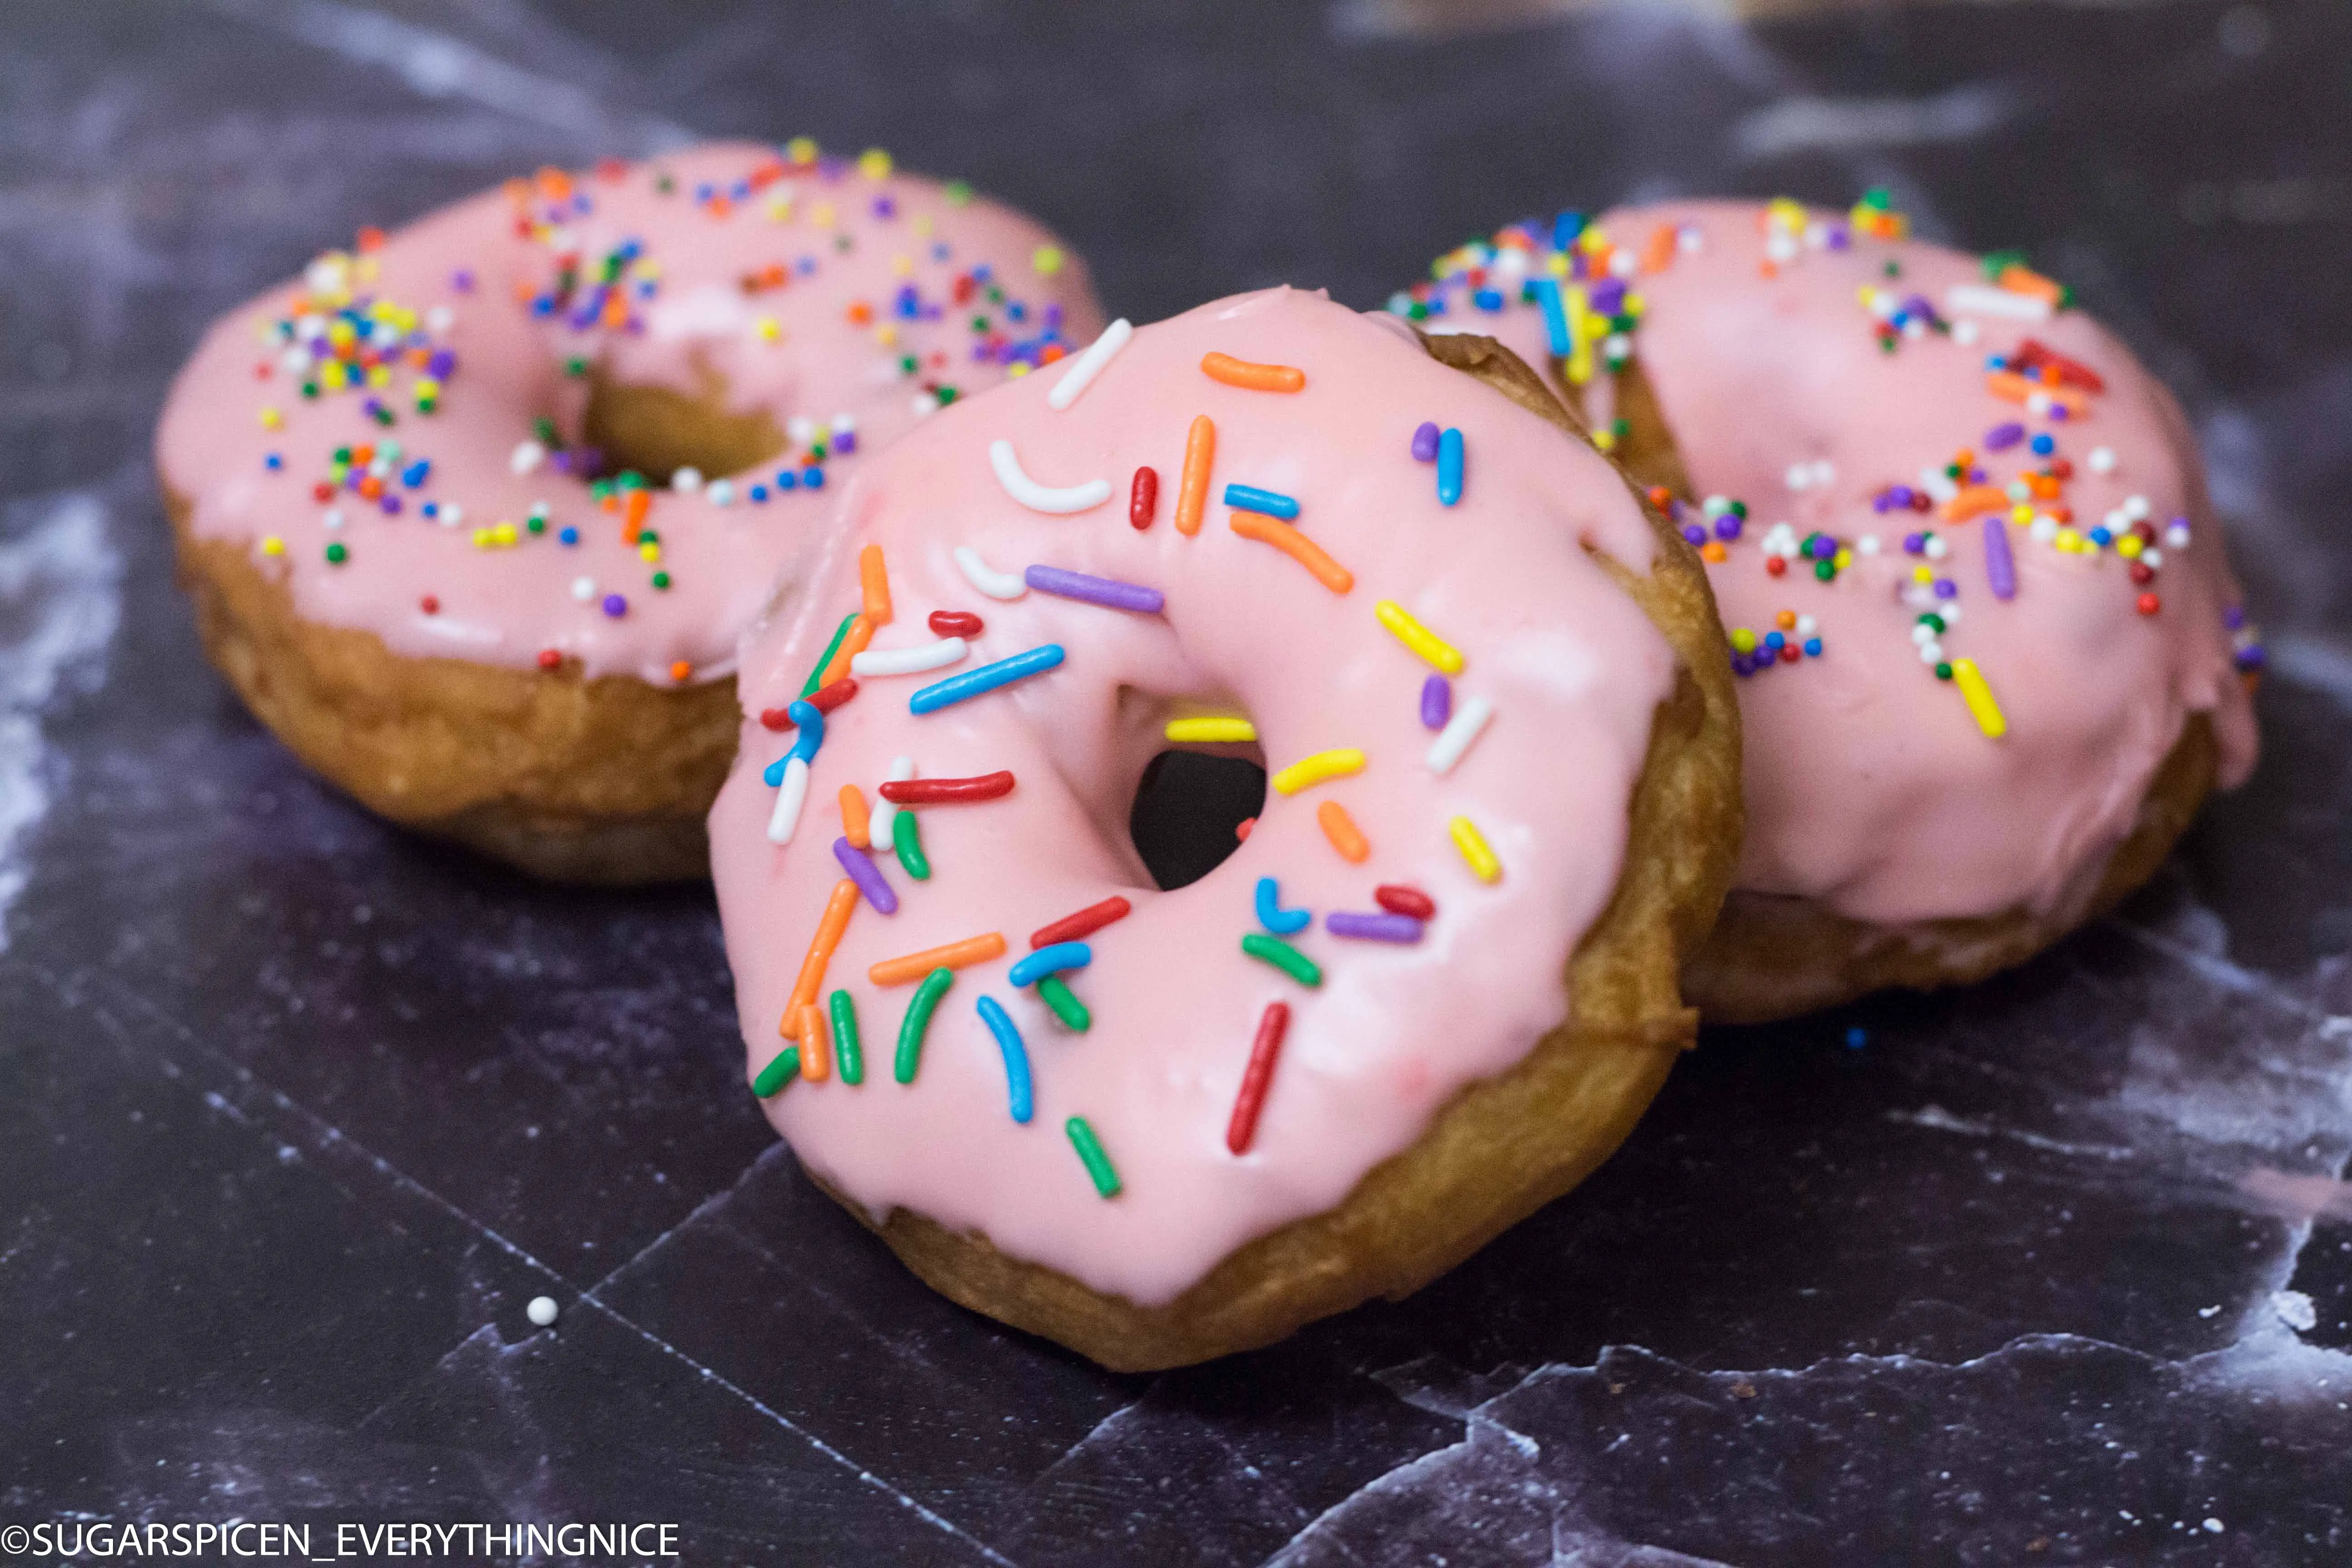 3 eggless donuts with pink chocolate glaze and sprinkles on top